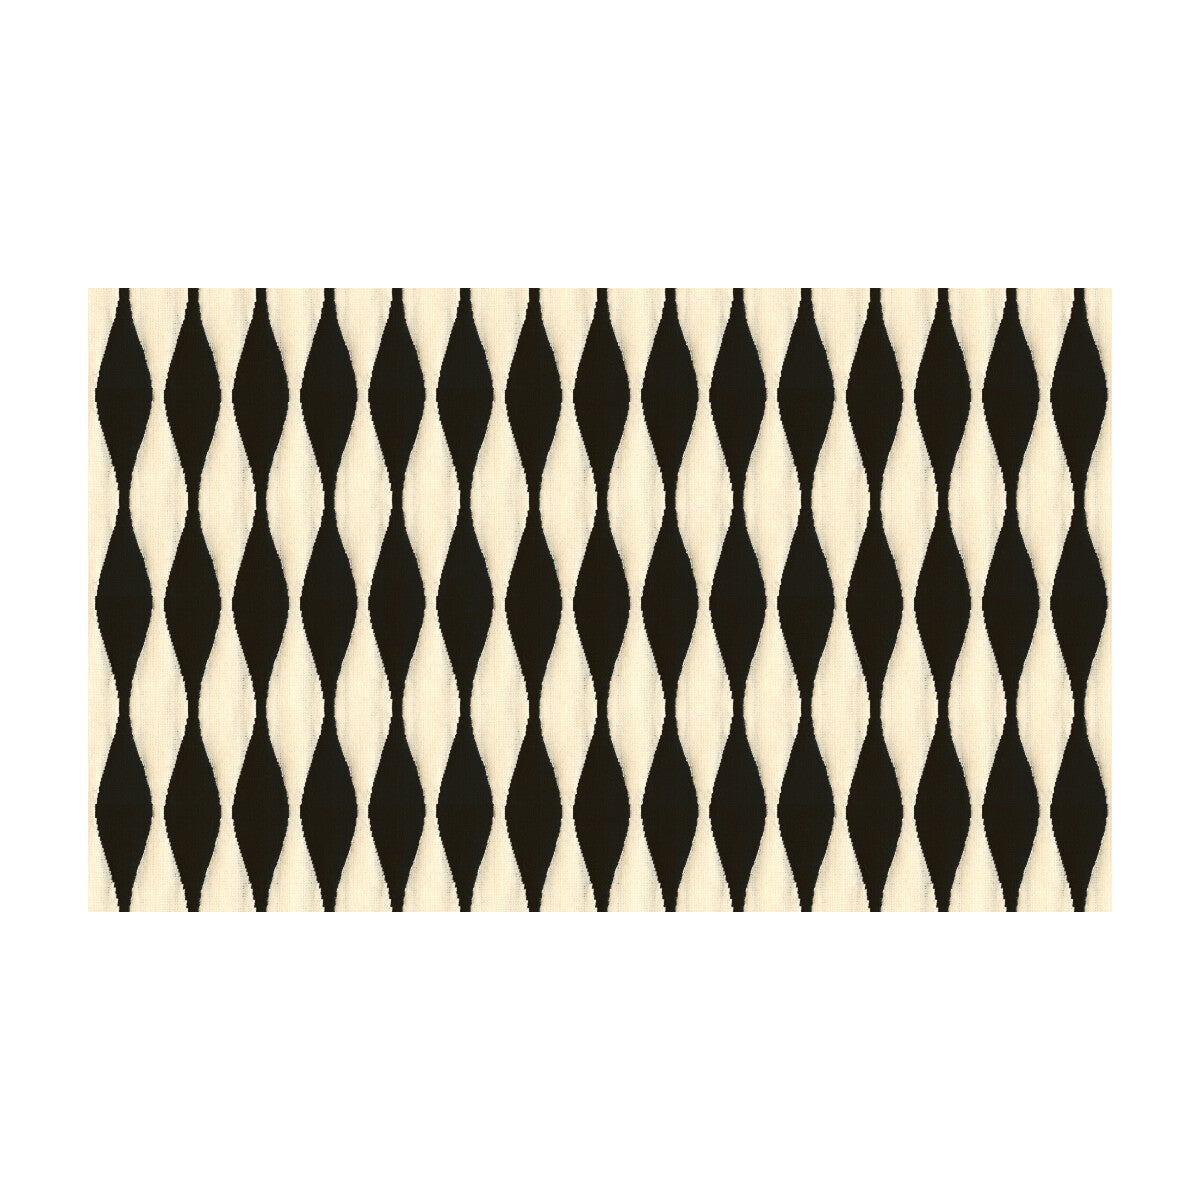 Bayamo fabric in licorice color - pattern 33651.81.0 - by Kravet Contract in the Jonathan Adler Clarity collection